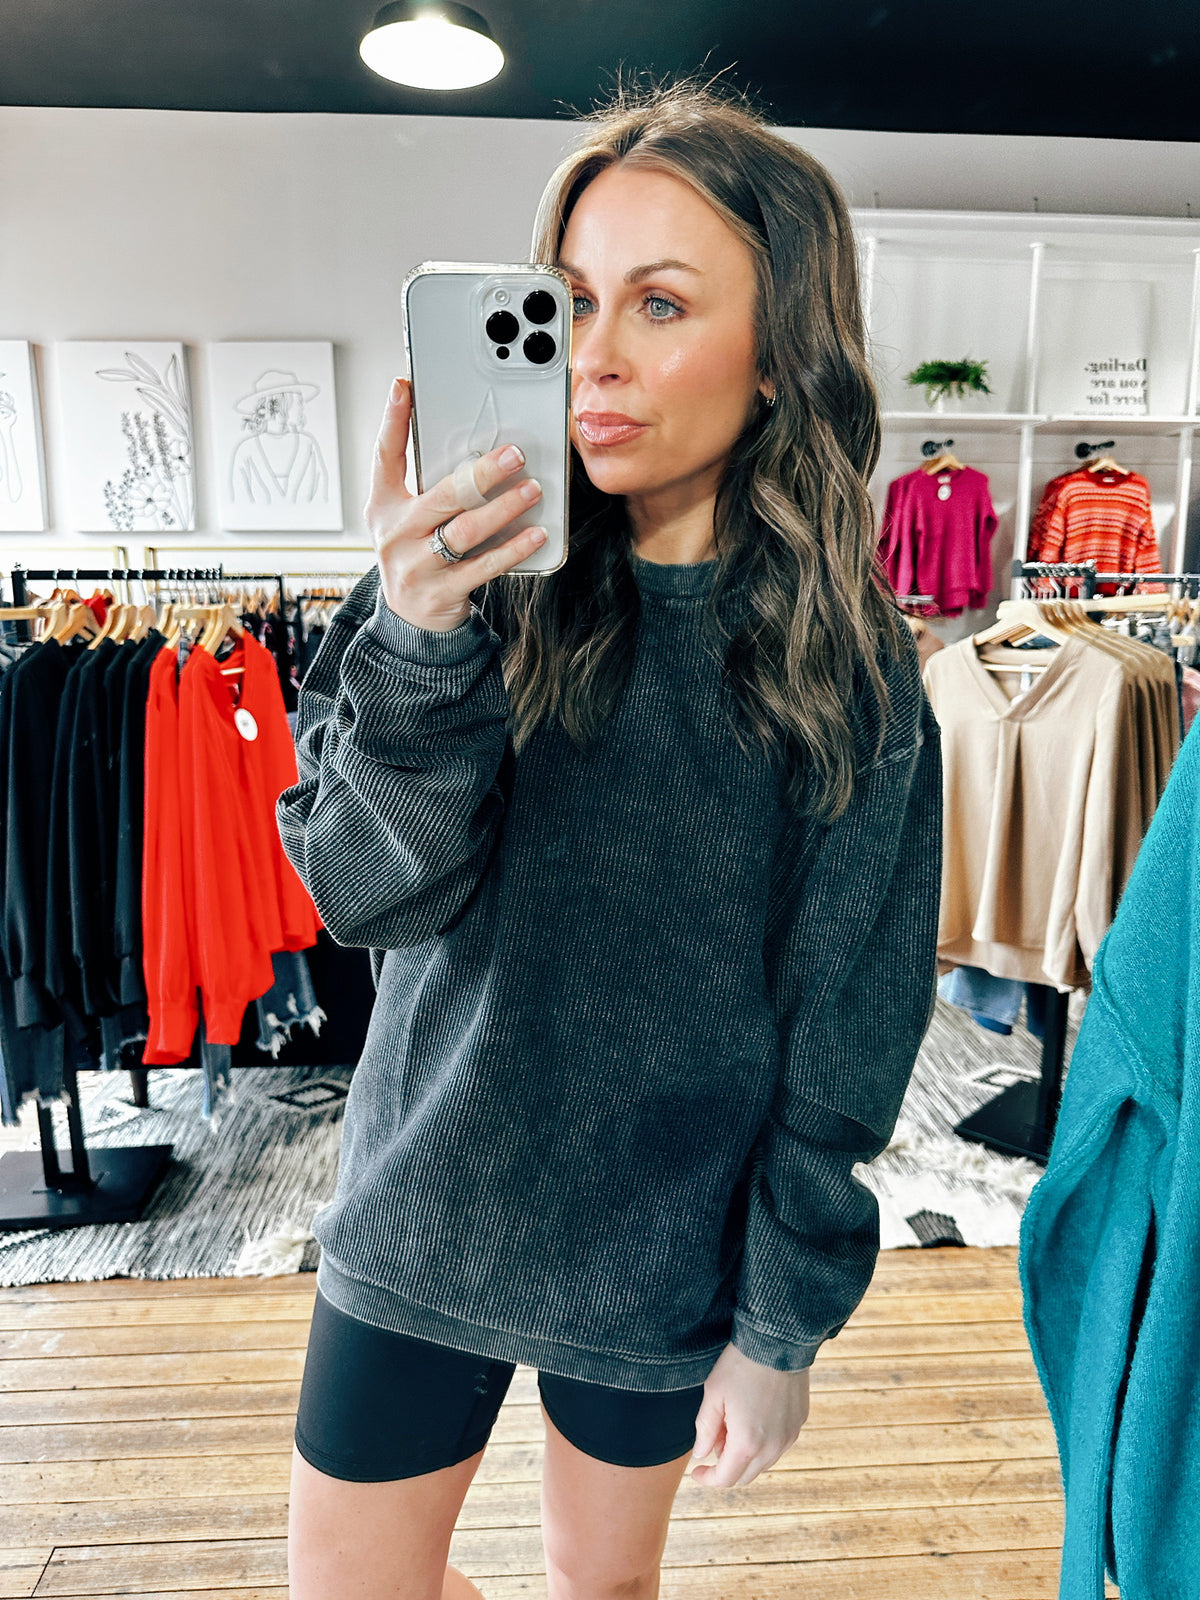 Washed Black Front View. Essential Luxe Corded Sweatshirt-5 Colors-Jackets & KimonosWomen's Luxe Corded Sweatshirt | VerClare Boutique | Chenoa, IL-Women's Luxe Corded Sweatshirt! Available in sizes S, M, L, XL in 4 color and offers a relaxed fit. Fabric: 100% Cotton. VerClare Boutique is located in Chenoa, IL about 20 minutes outside of Bloomington, IL & Normal, IL. Located in McLean County. Shop Pay Accepted! -VerClare Boutique